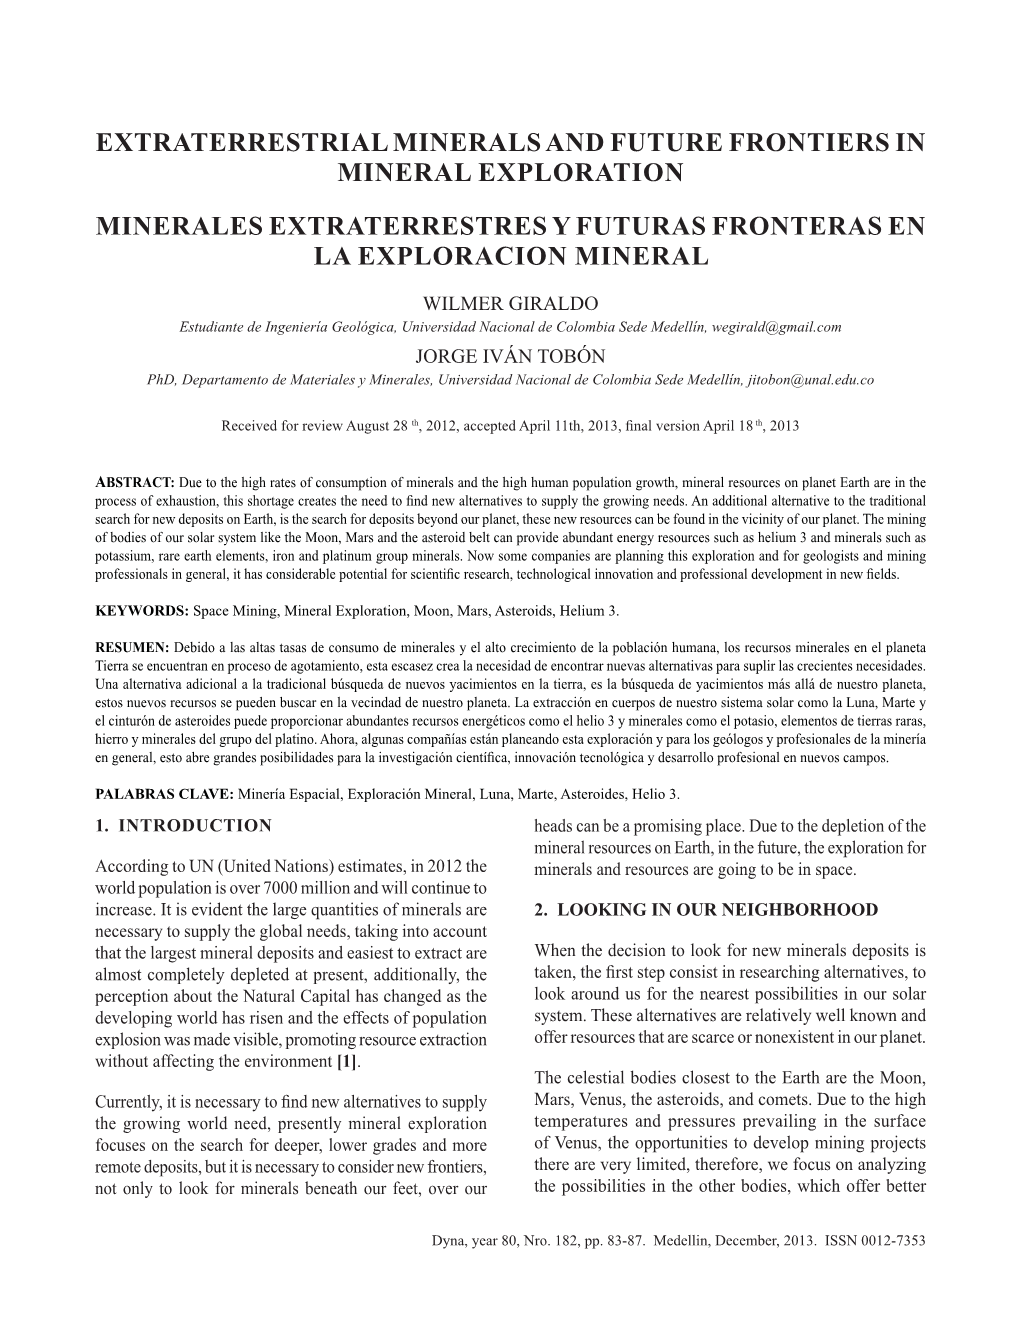 Extraterrestrial Minerals and Future Frontiers in Mineral Exploration